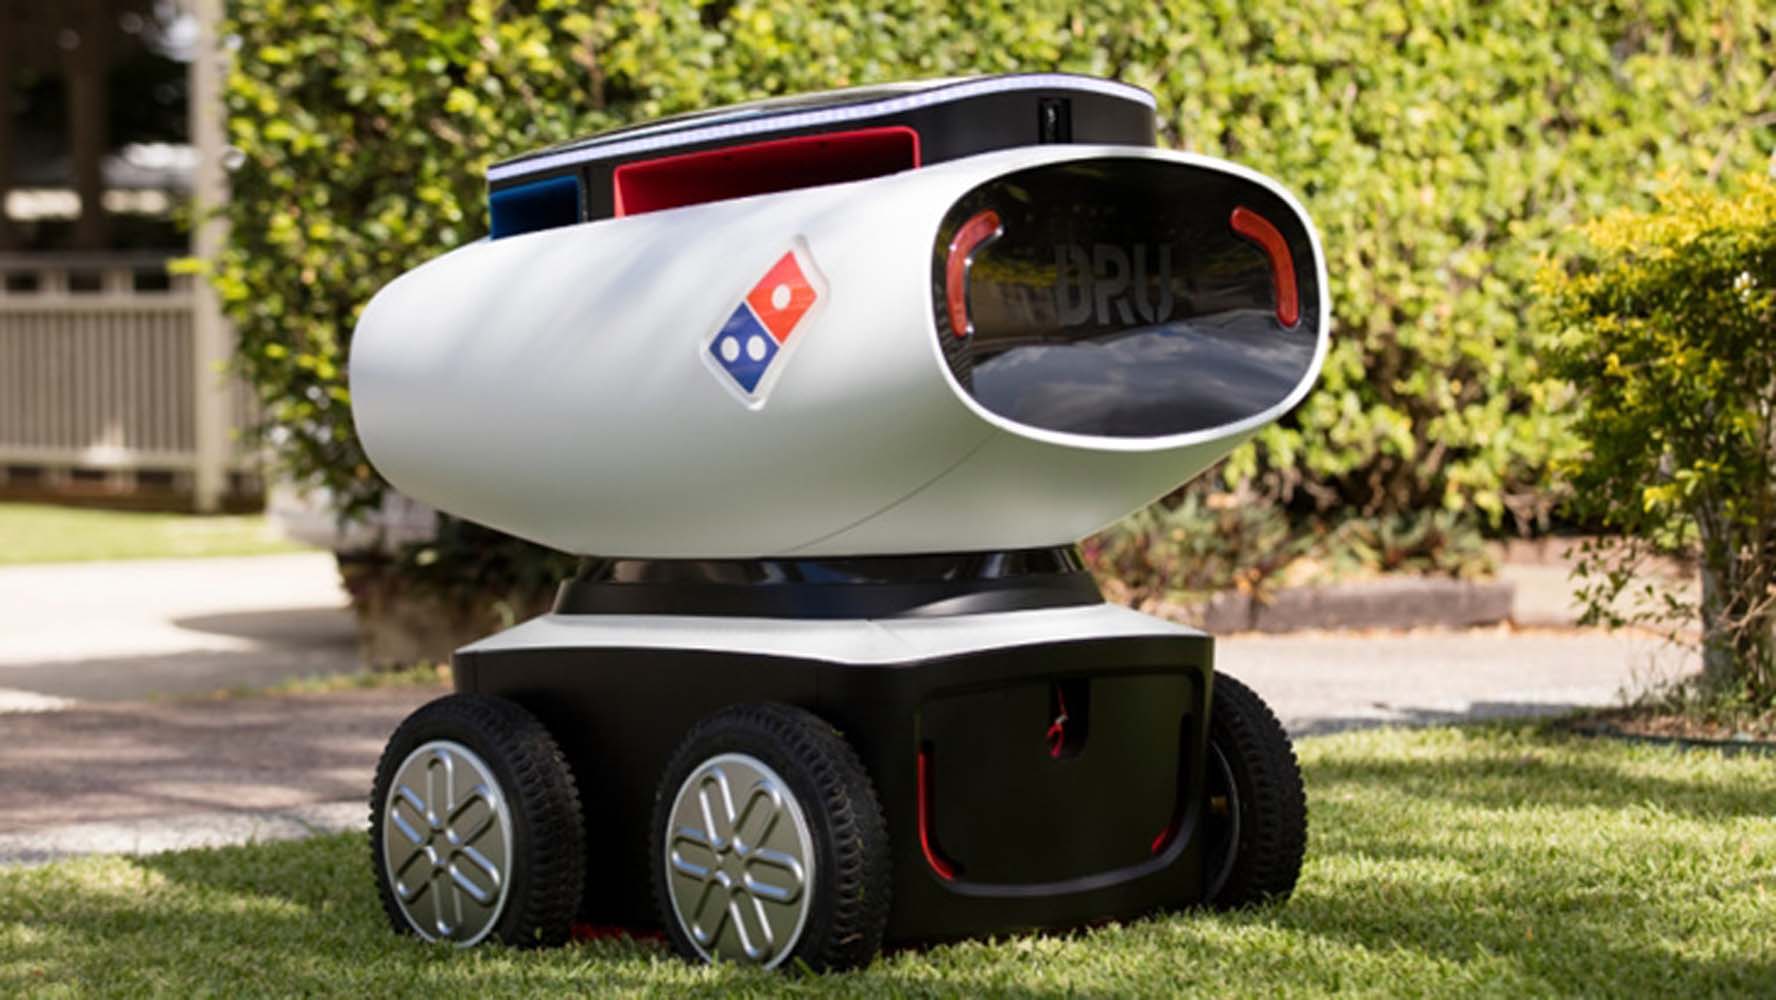 Domino's Pizza and Nuro will start pizza delivery by robotic vehicles